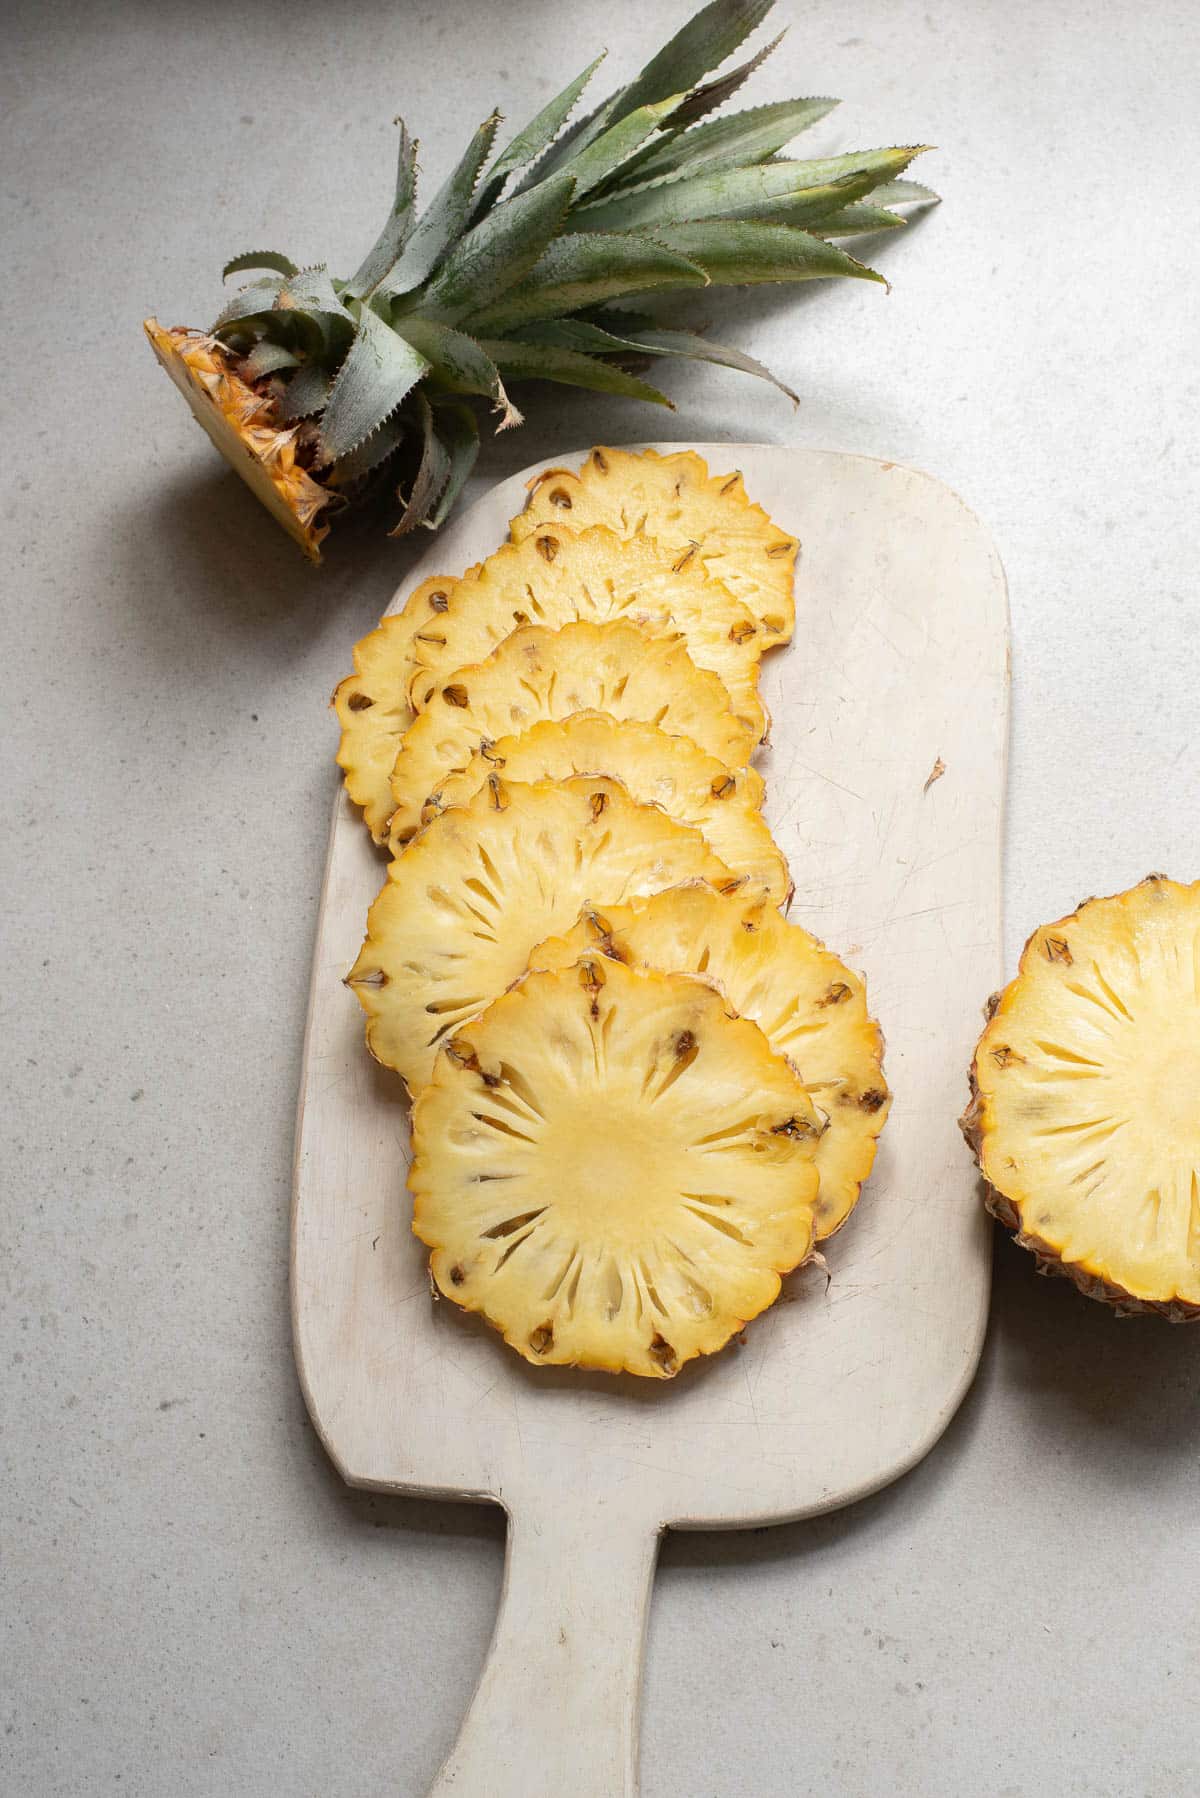 Pineapple slices on a cutting board.